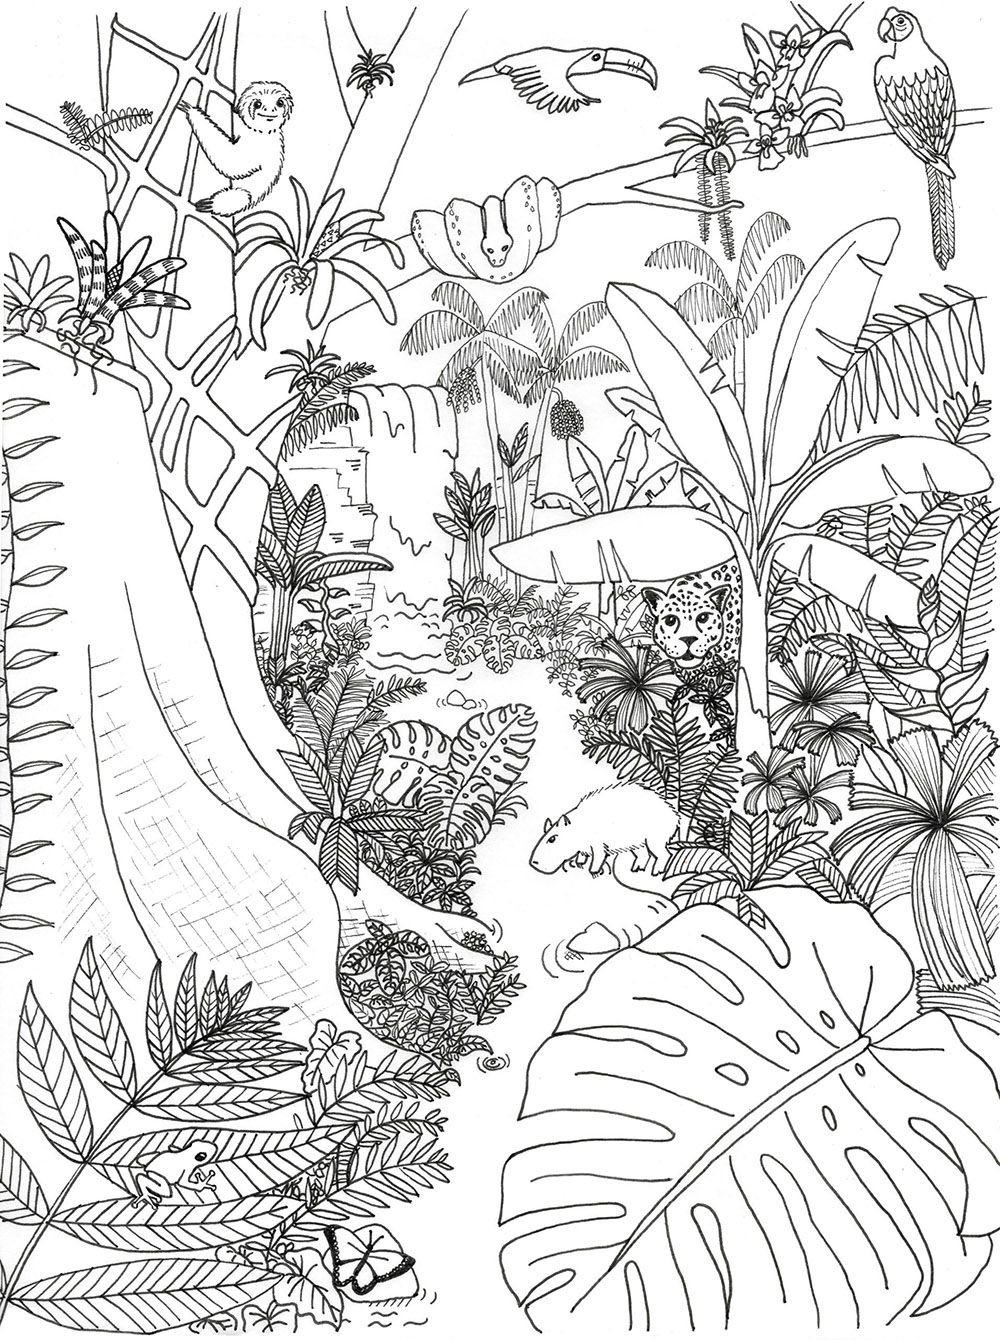 Coloring Pages Archives | Rainforest Alliance - Free Printable Rainforest Pictures